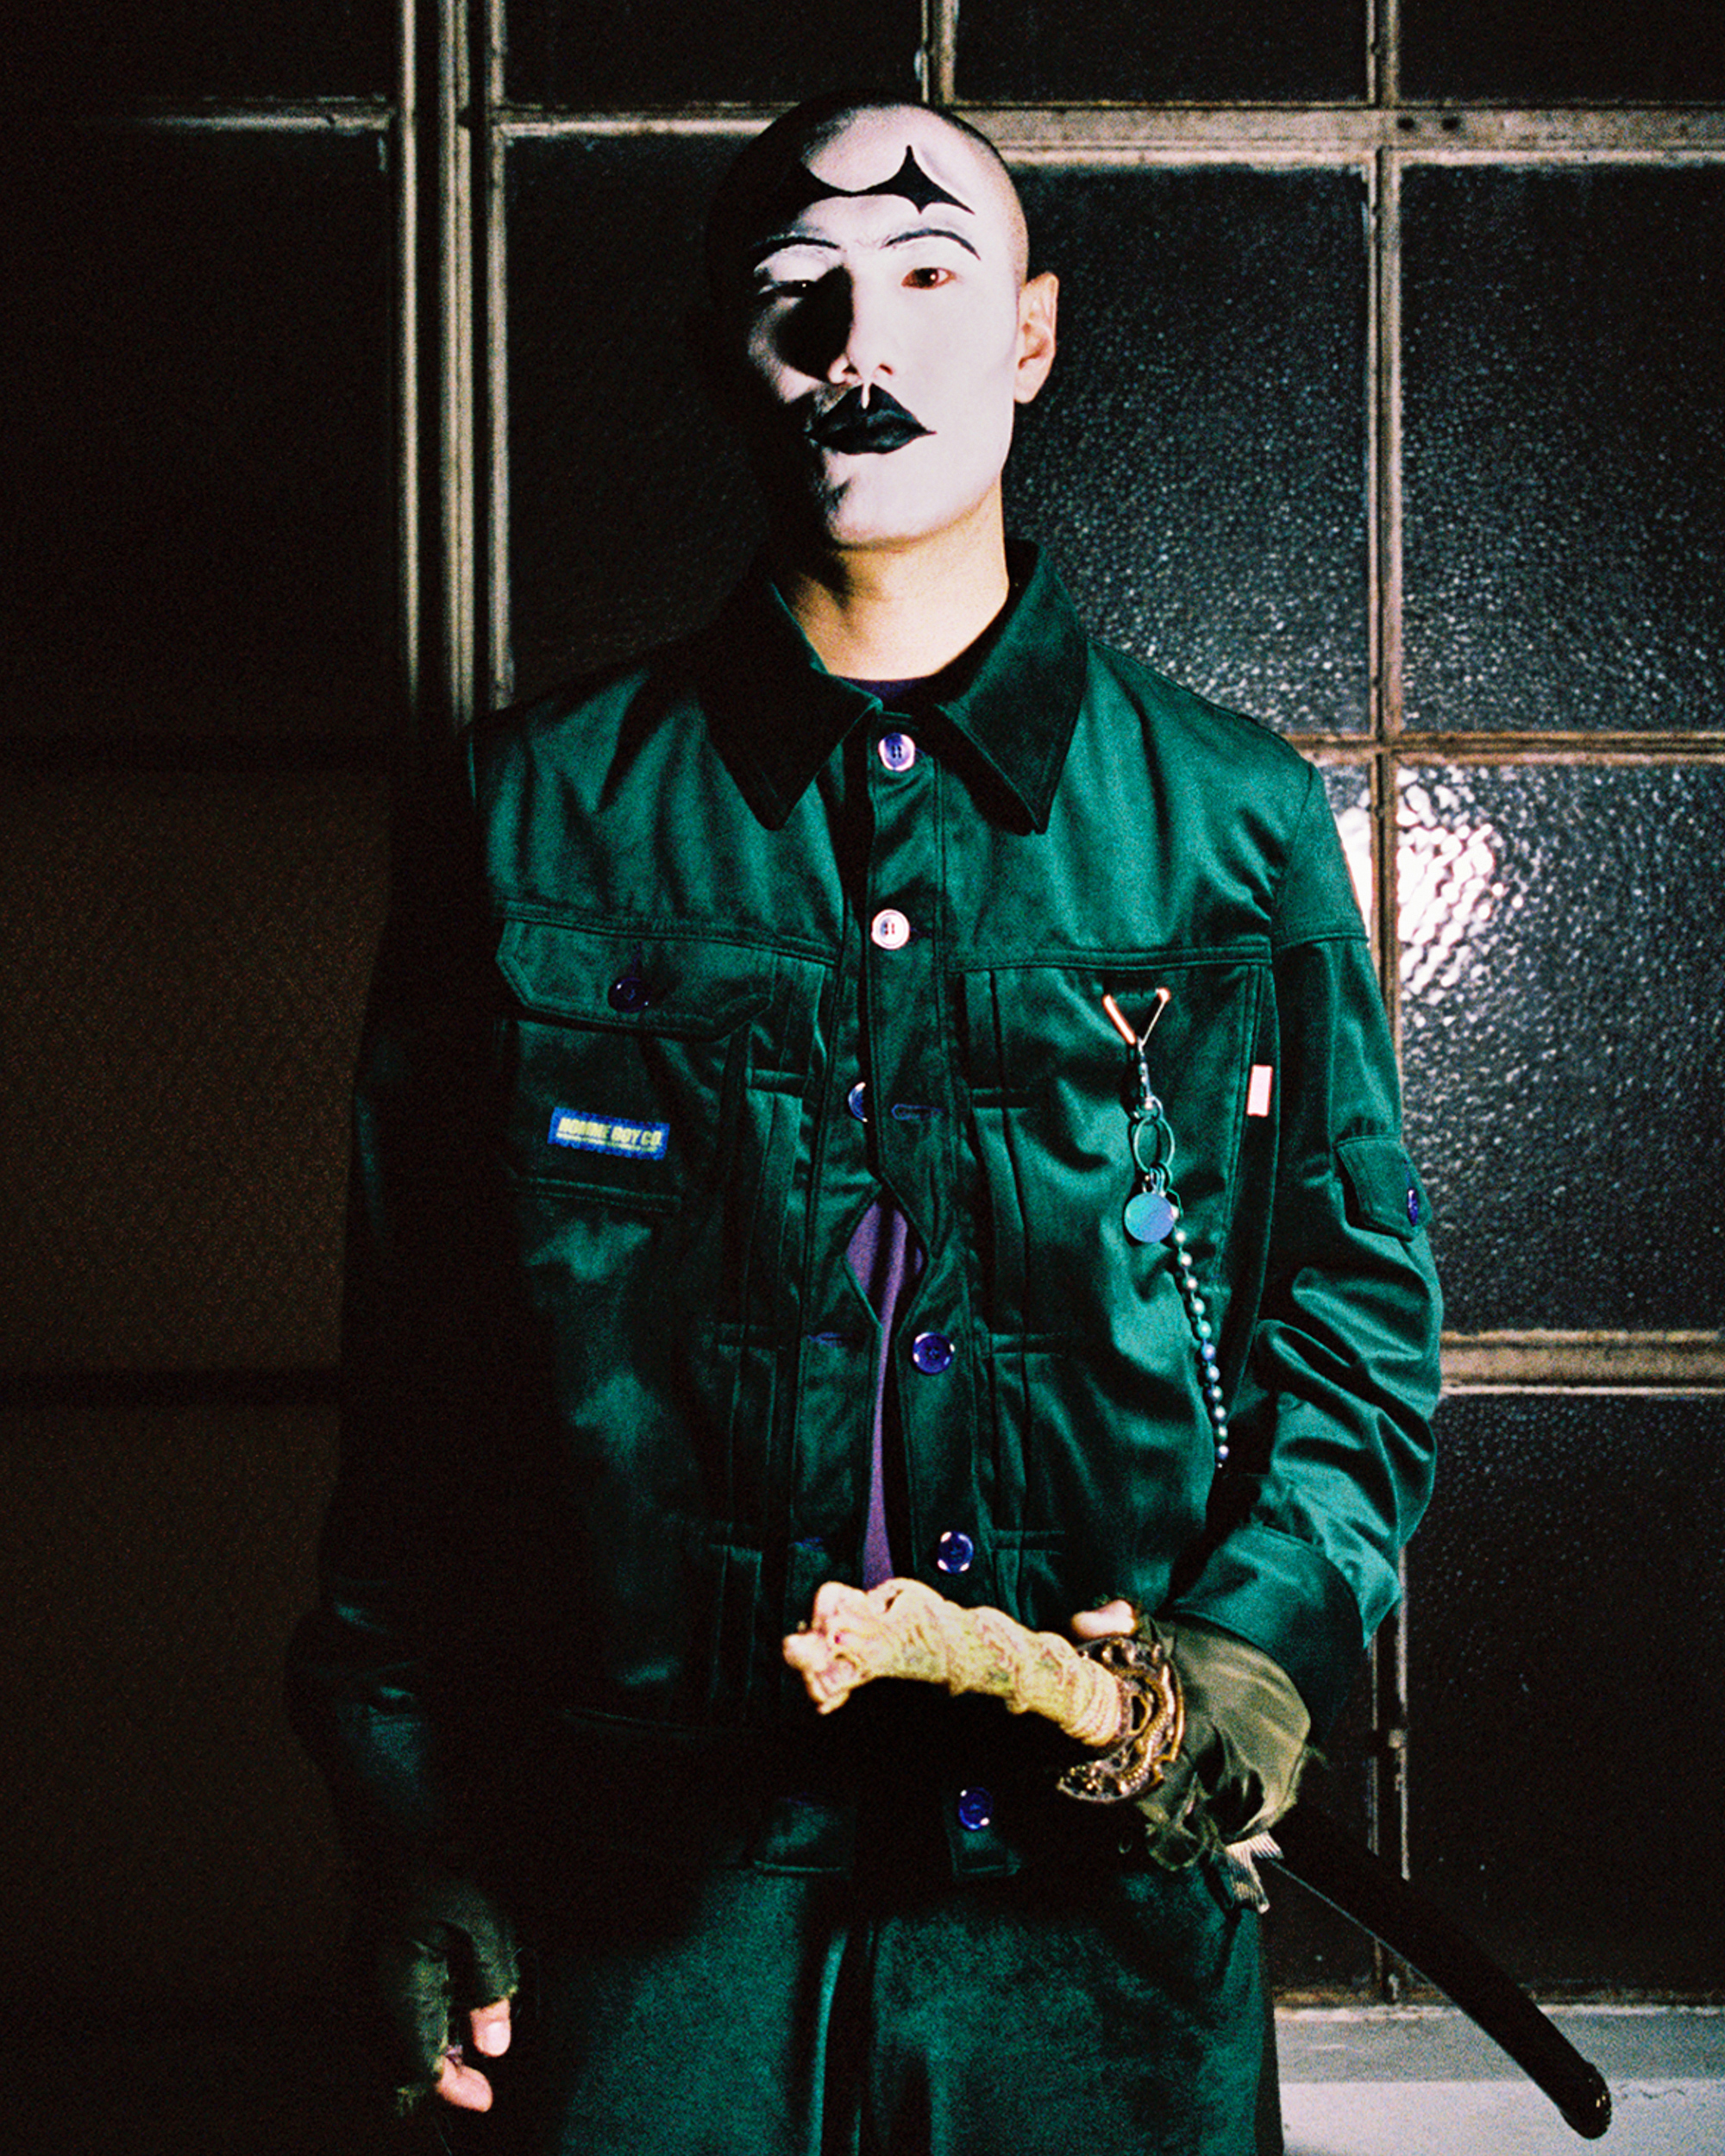 Model with black and white joker facepaint wearing a green ensemble with a shealthed sword on his hip